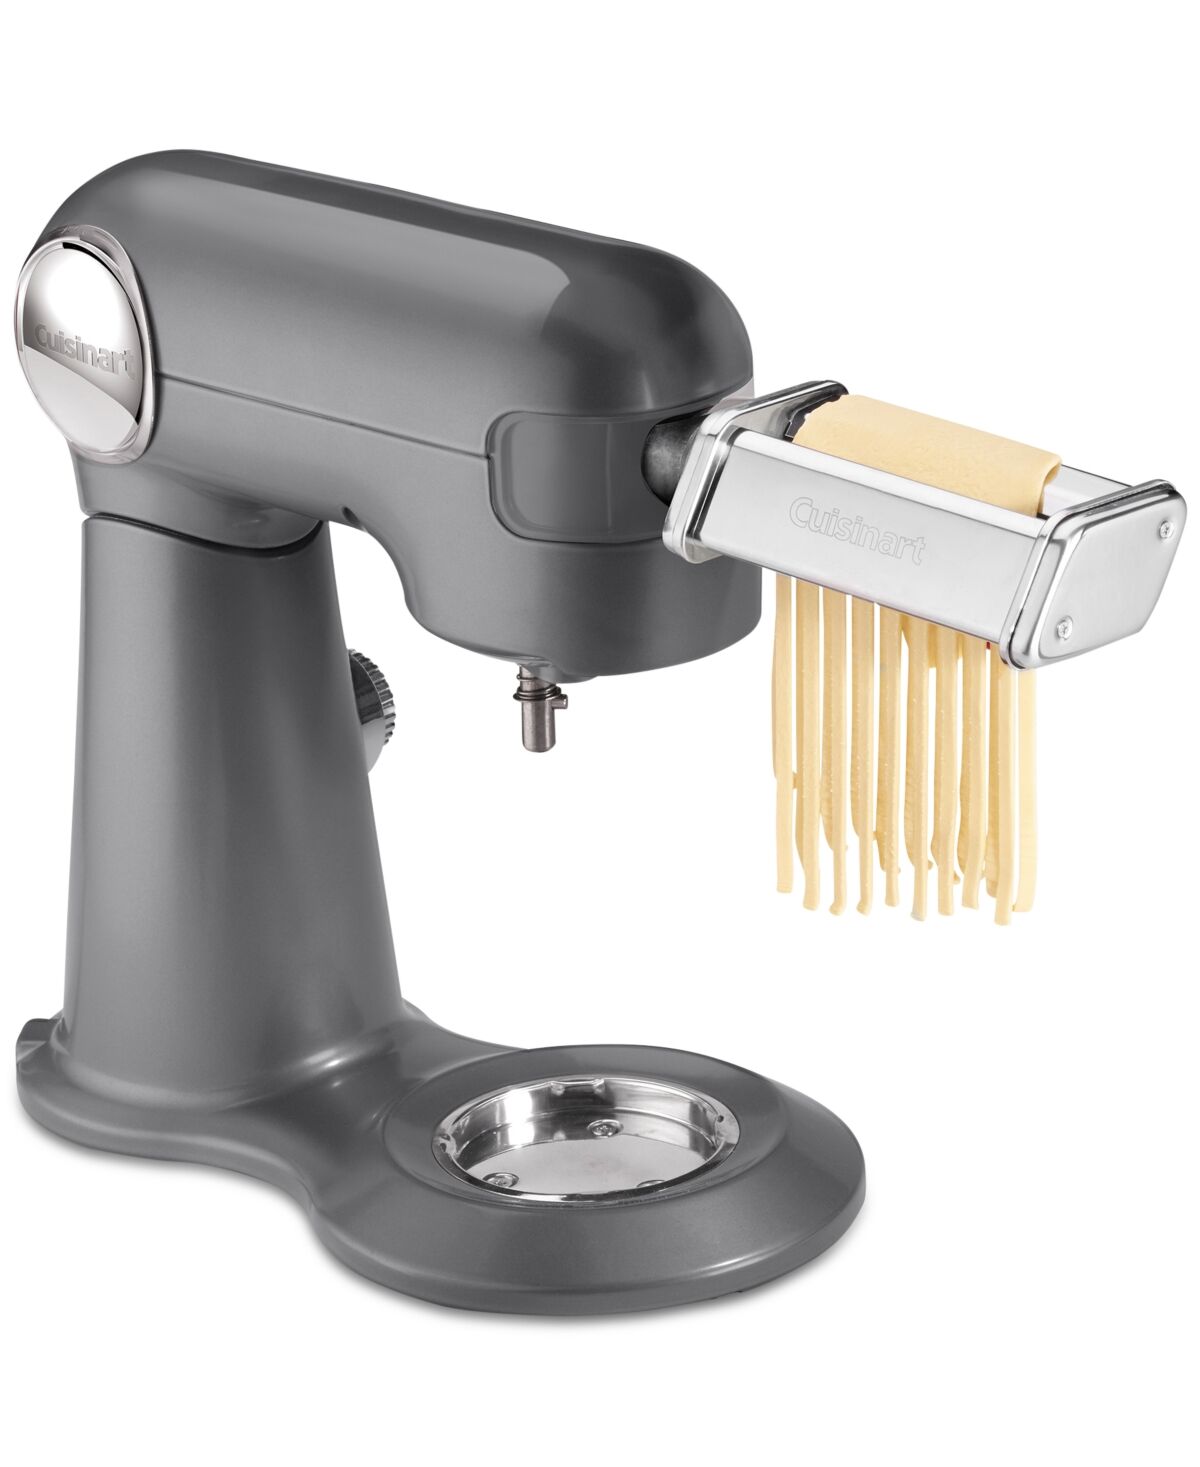 Cuisinart Prs-50 Pasta Roller Attachment - Stainless